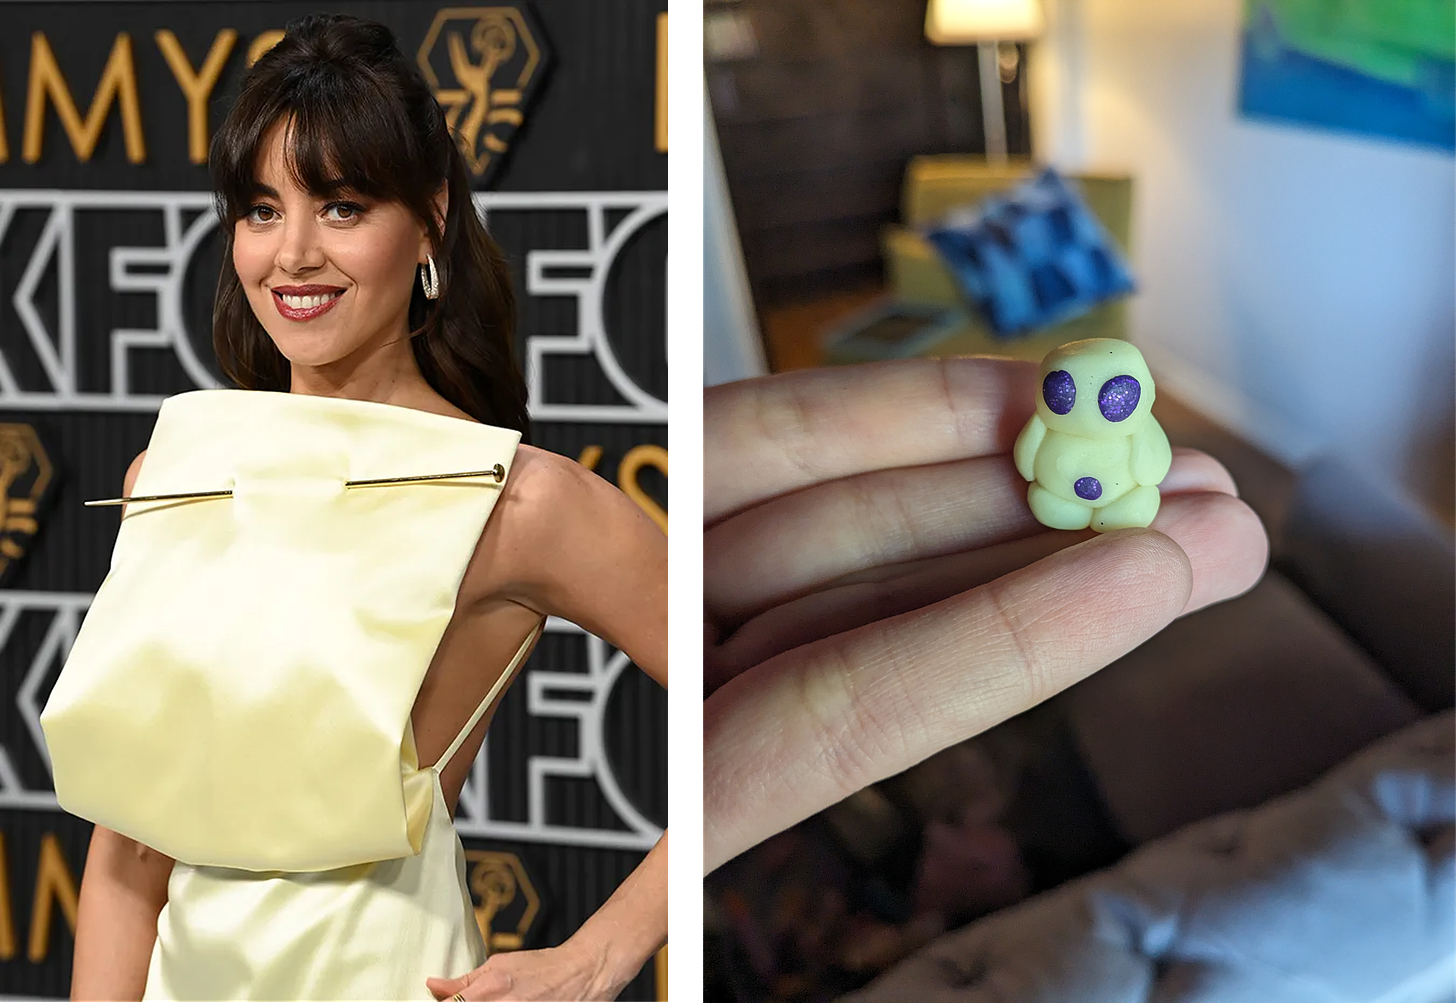 Left: Aubrey Plaza in the worst yellow dress I've ever seen. Right: Polymer clay alien with purple sparkly eyes and belly button.